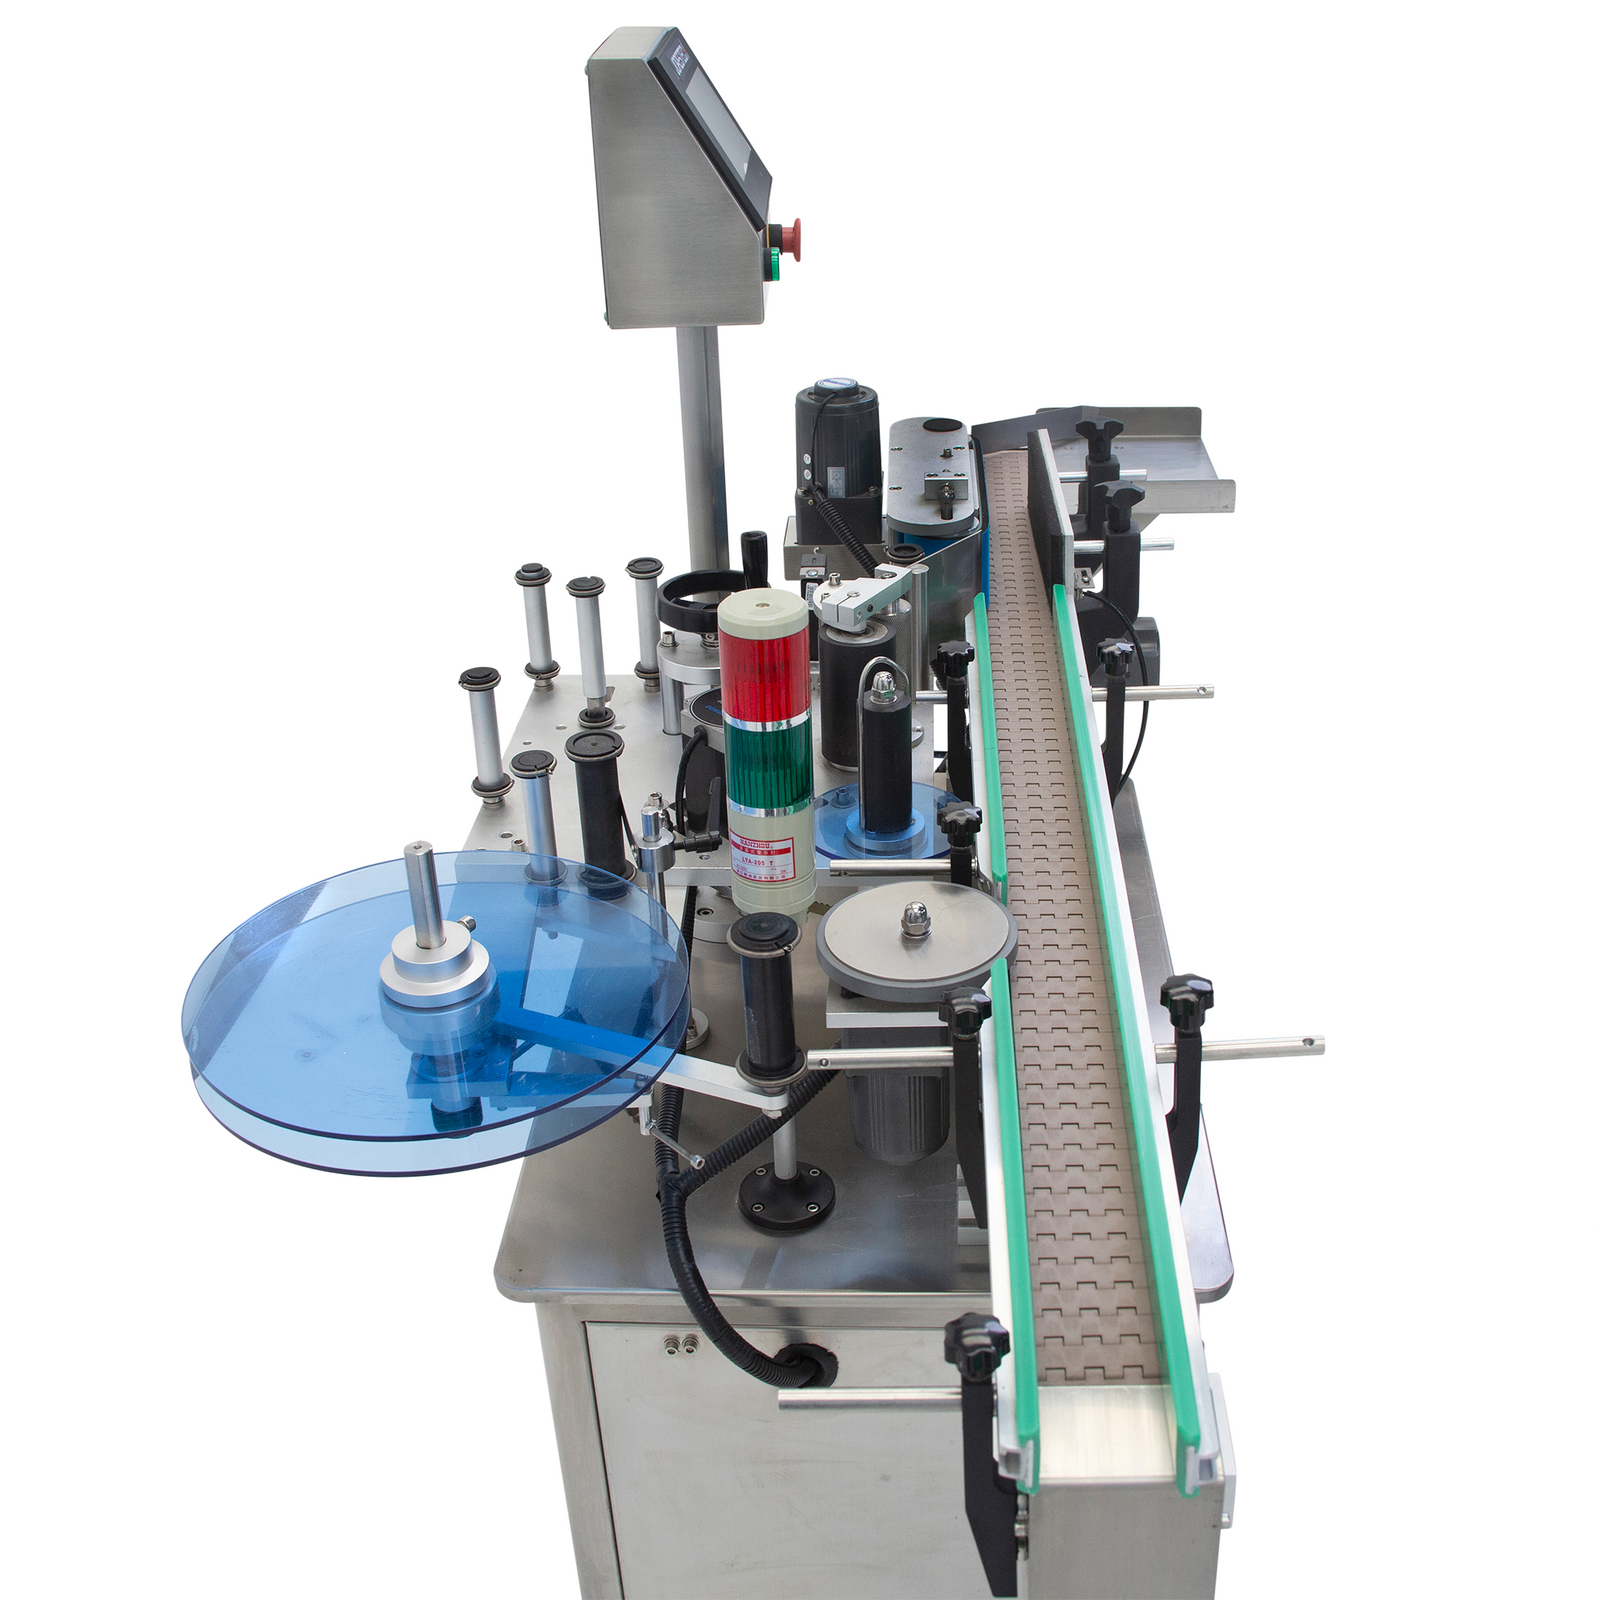 top view of stainless steel automatic label applicator for round containers with green guard rails and motorized conveyor belt